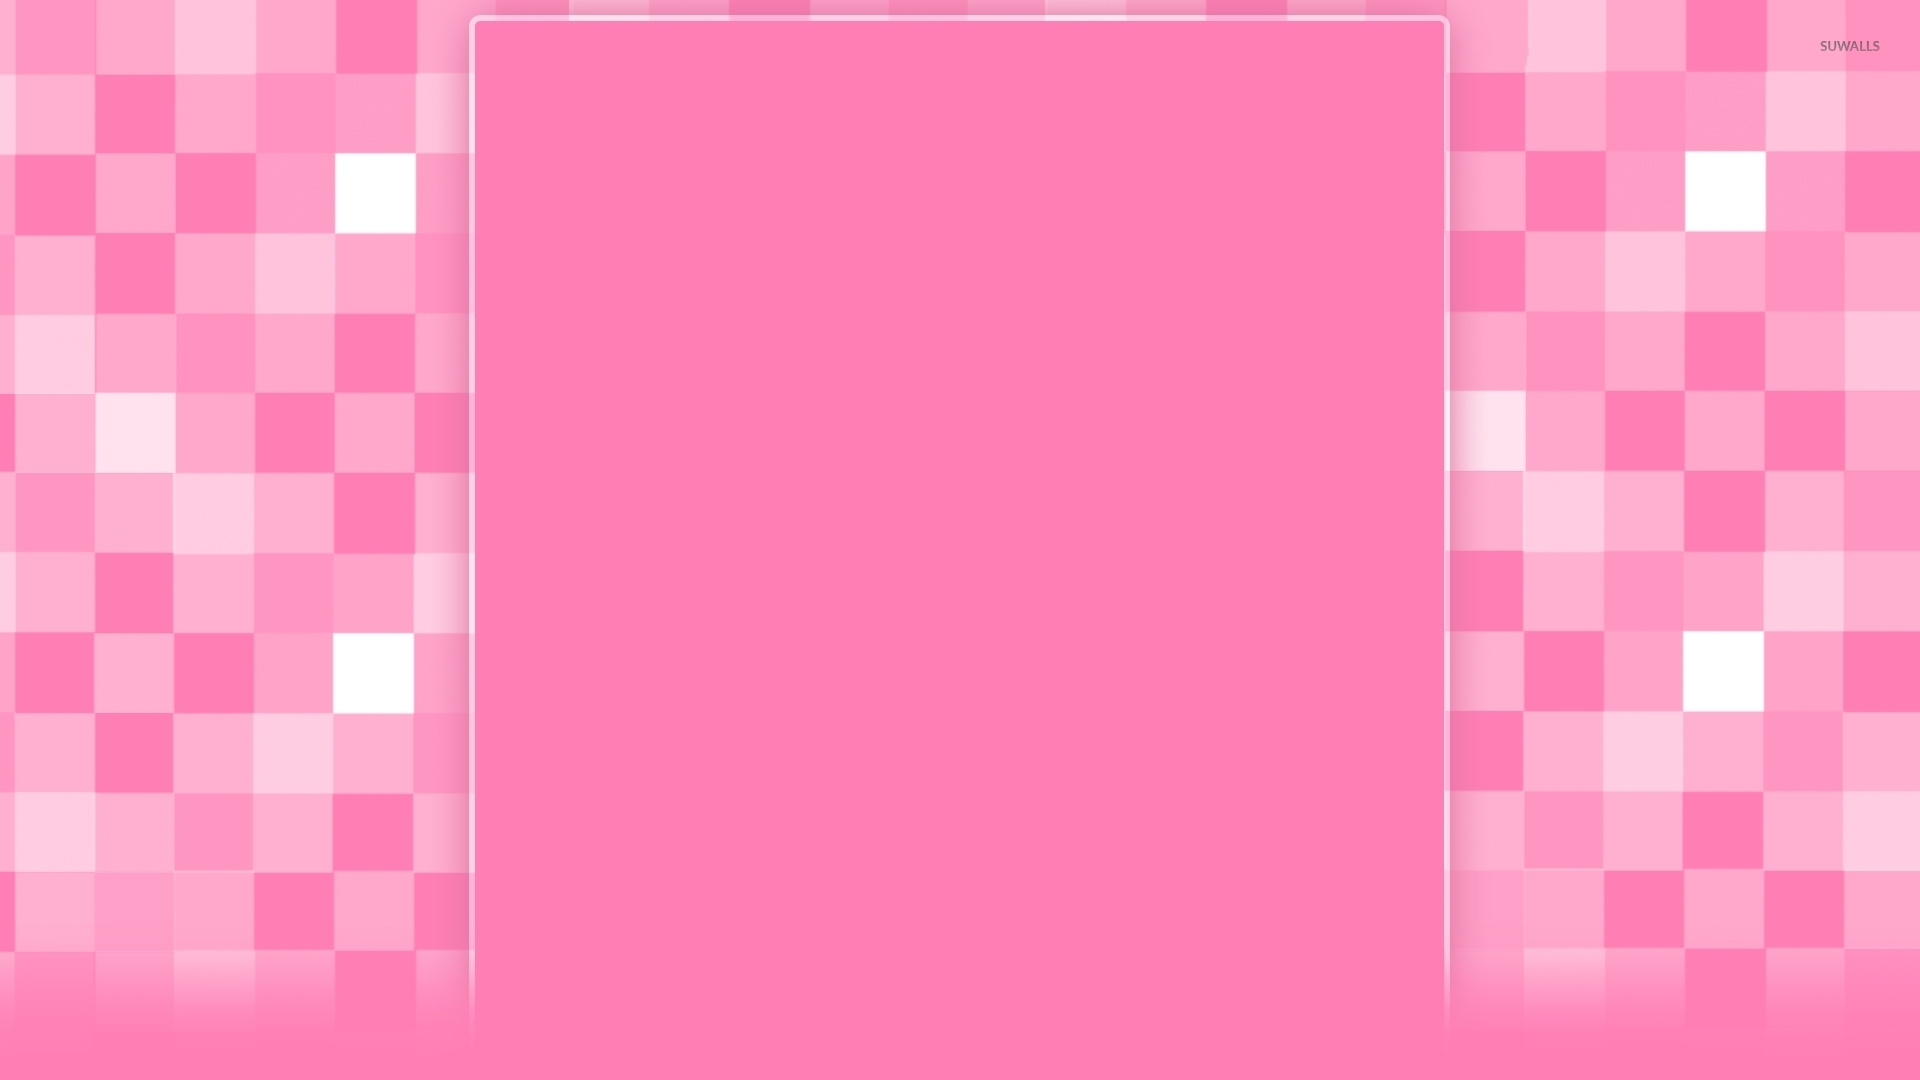 Black and pink pattern background images and wallpapers â yl computing